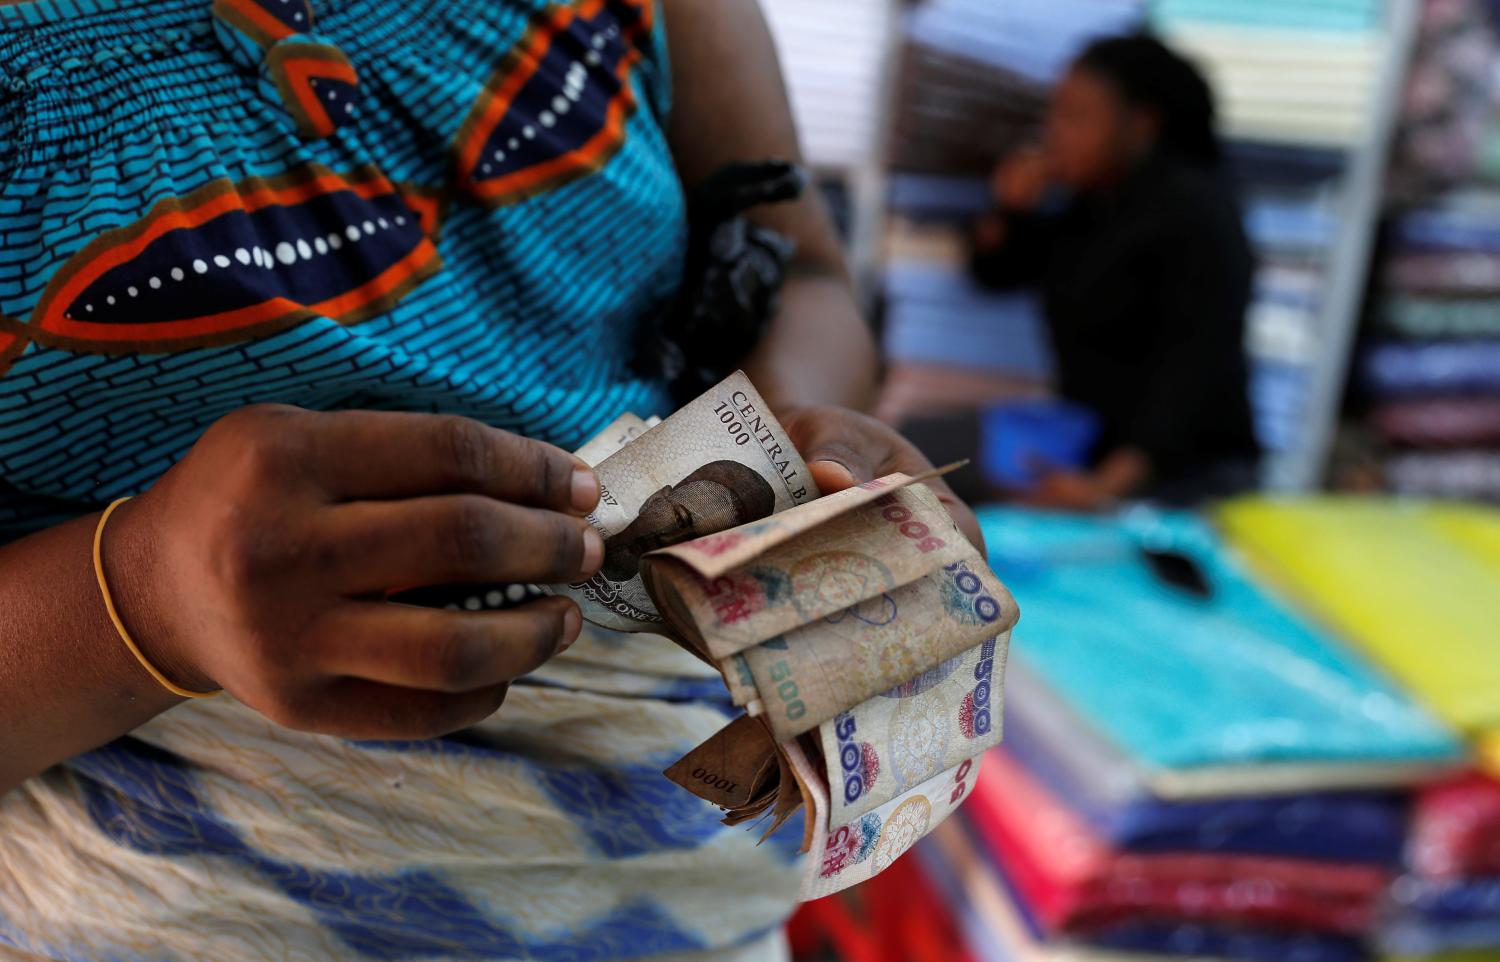 A customer counts money inside a textile shop in Idumota Market, in Nigeria's commercial capital of Lagos, Nigeria February 11, 2019. REUTERS/Nyancho NwaNri - RC1A016FA600